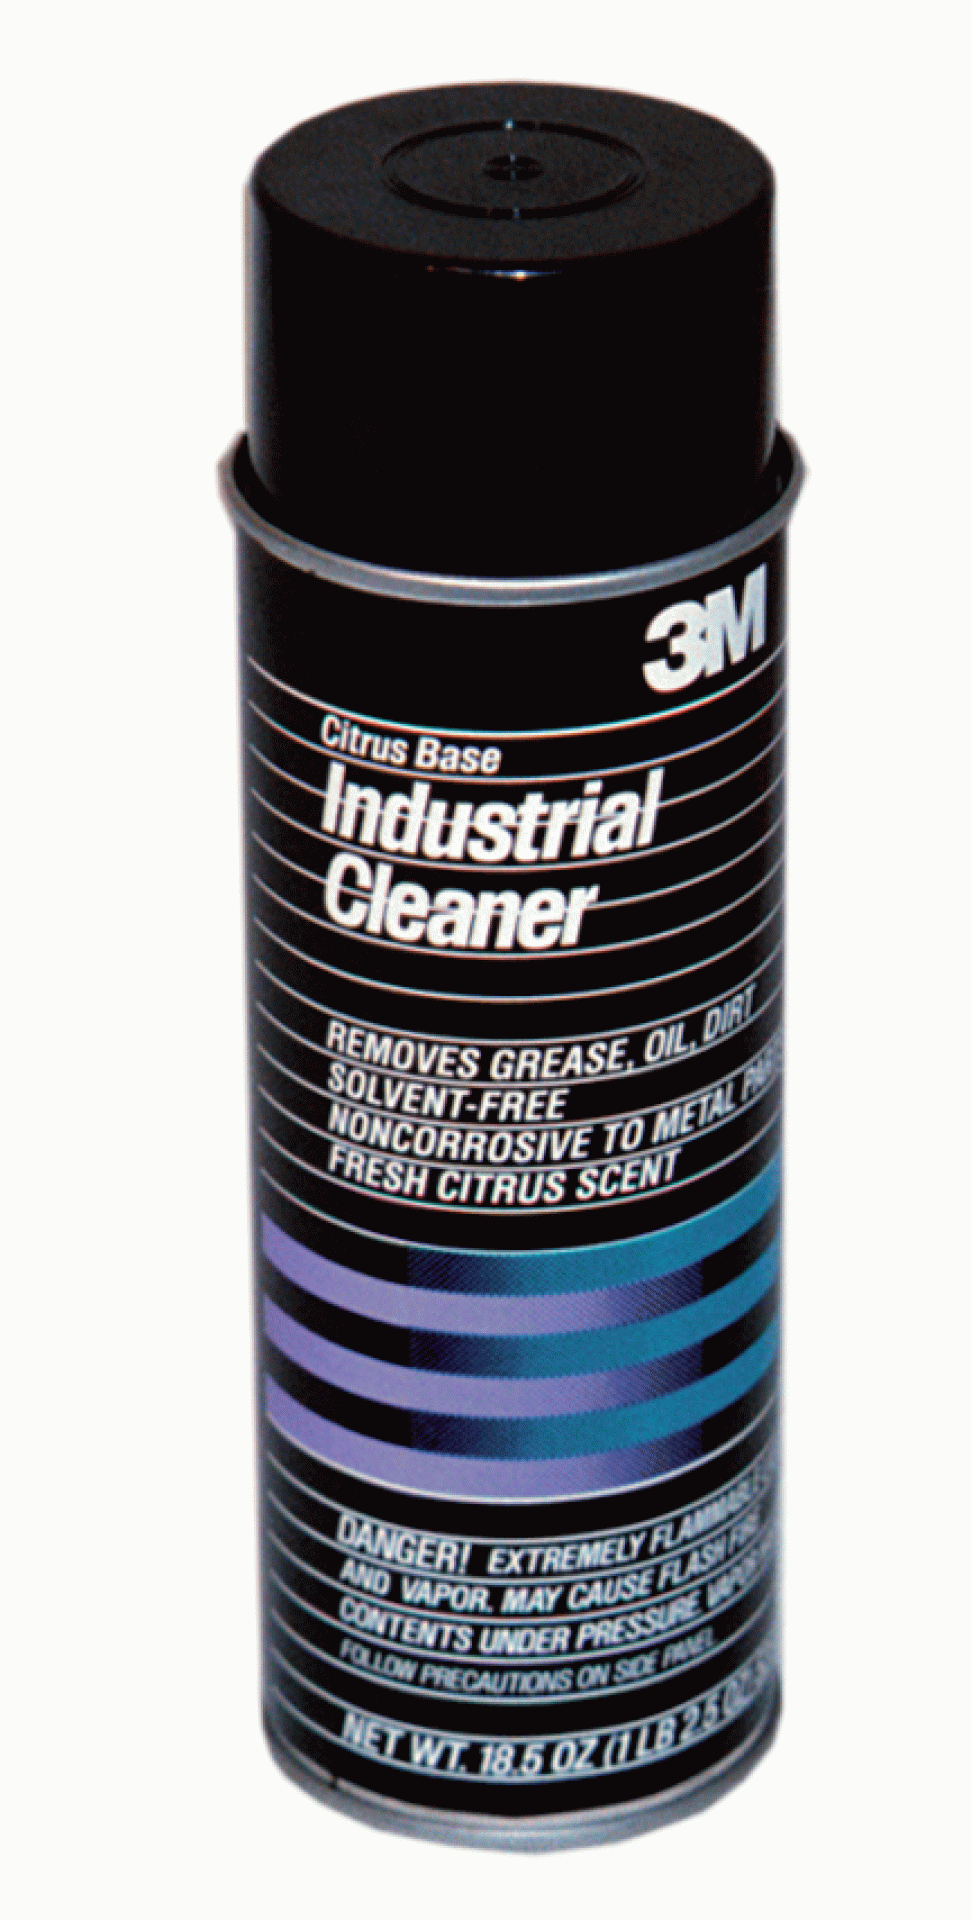 3M Company | 76394 | INDUSTRIAL CLEANER - CITRUS BASE 18.5 Oz.